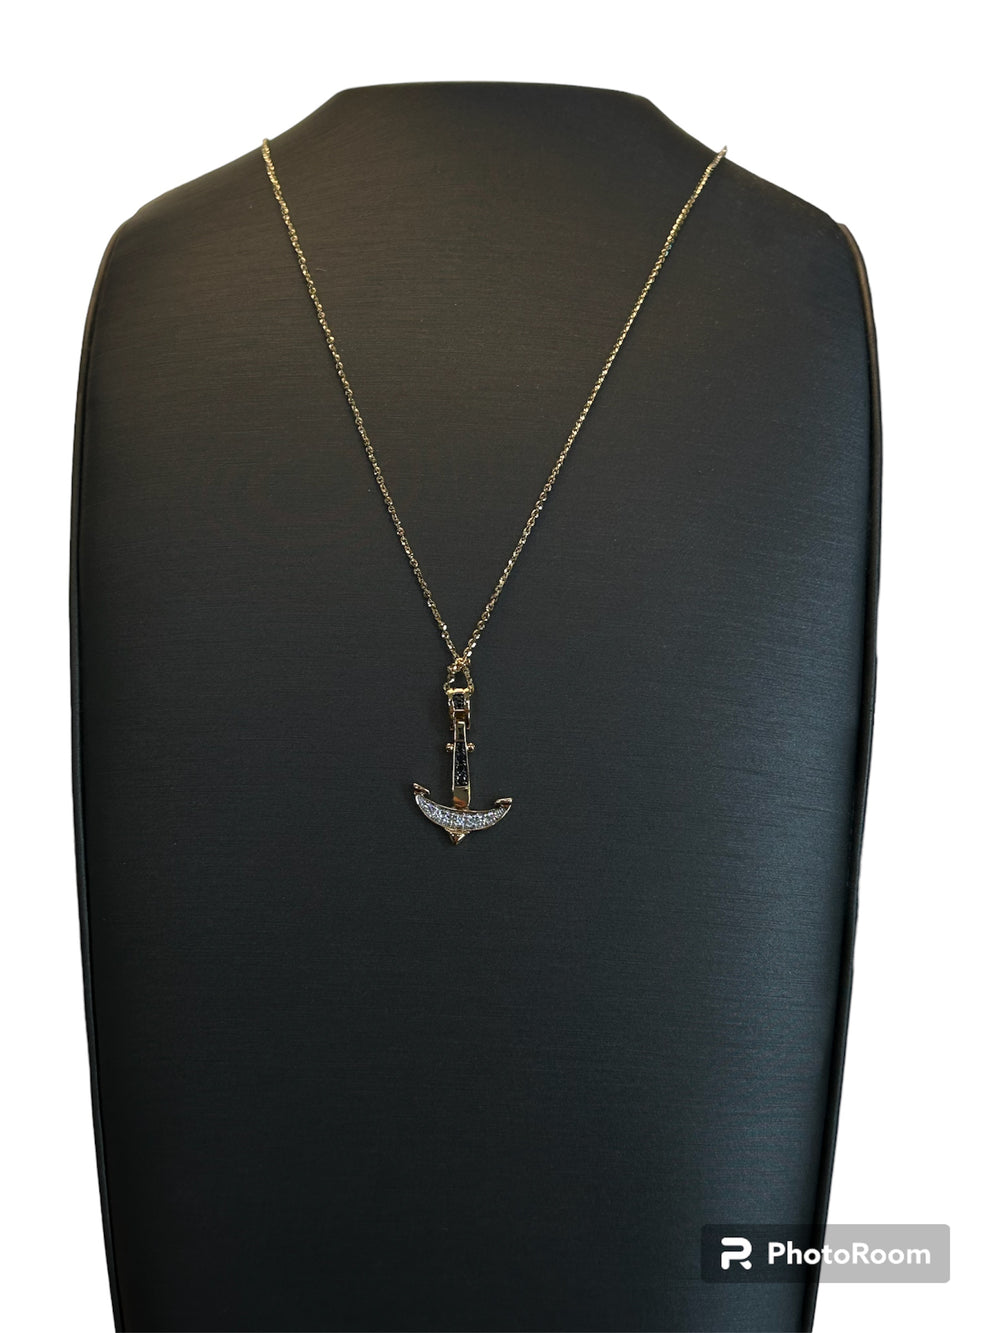 Yellow gold anchor necklace with white and black diamonds - UC093GB